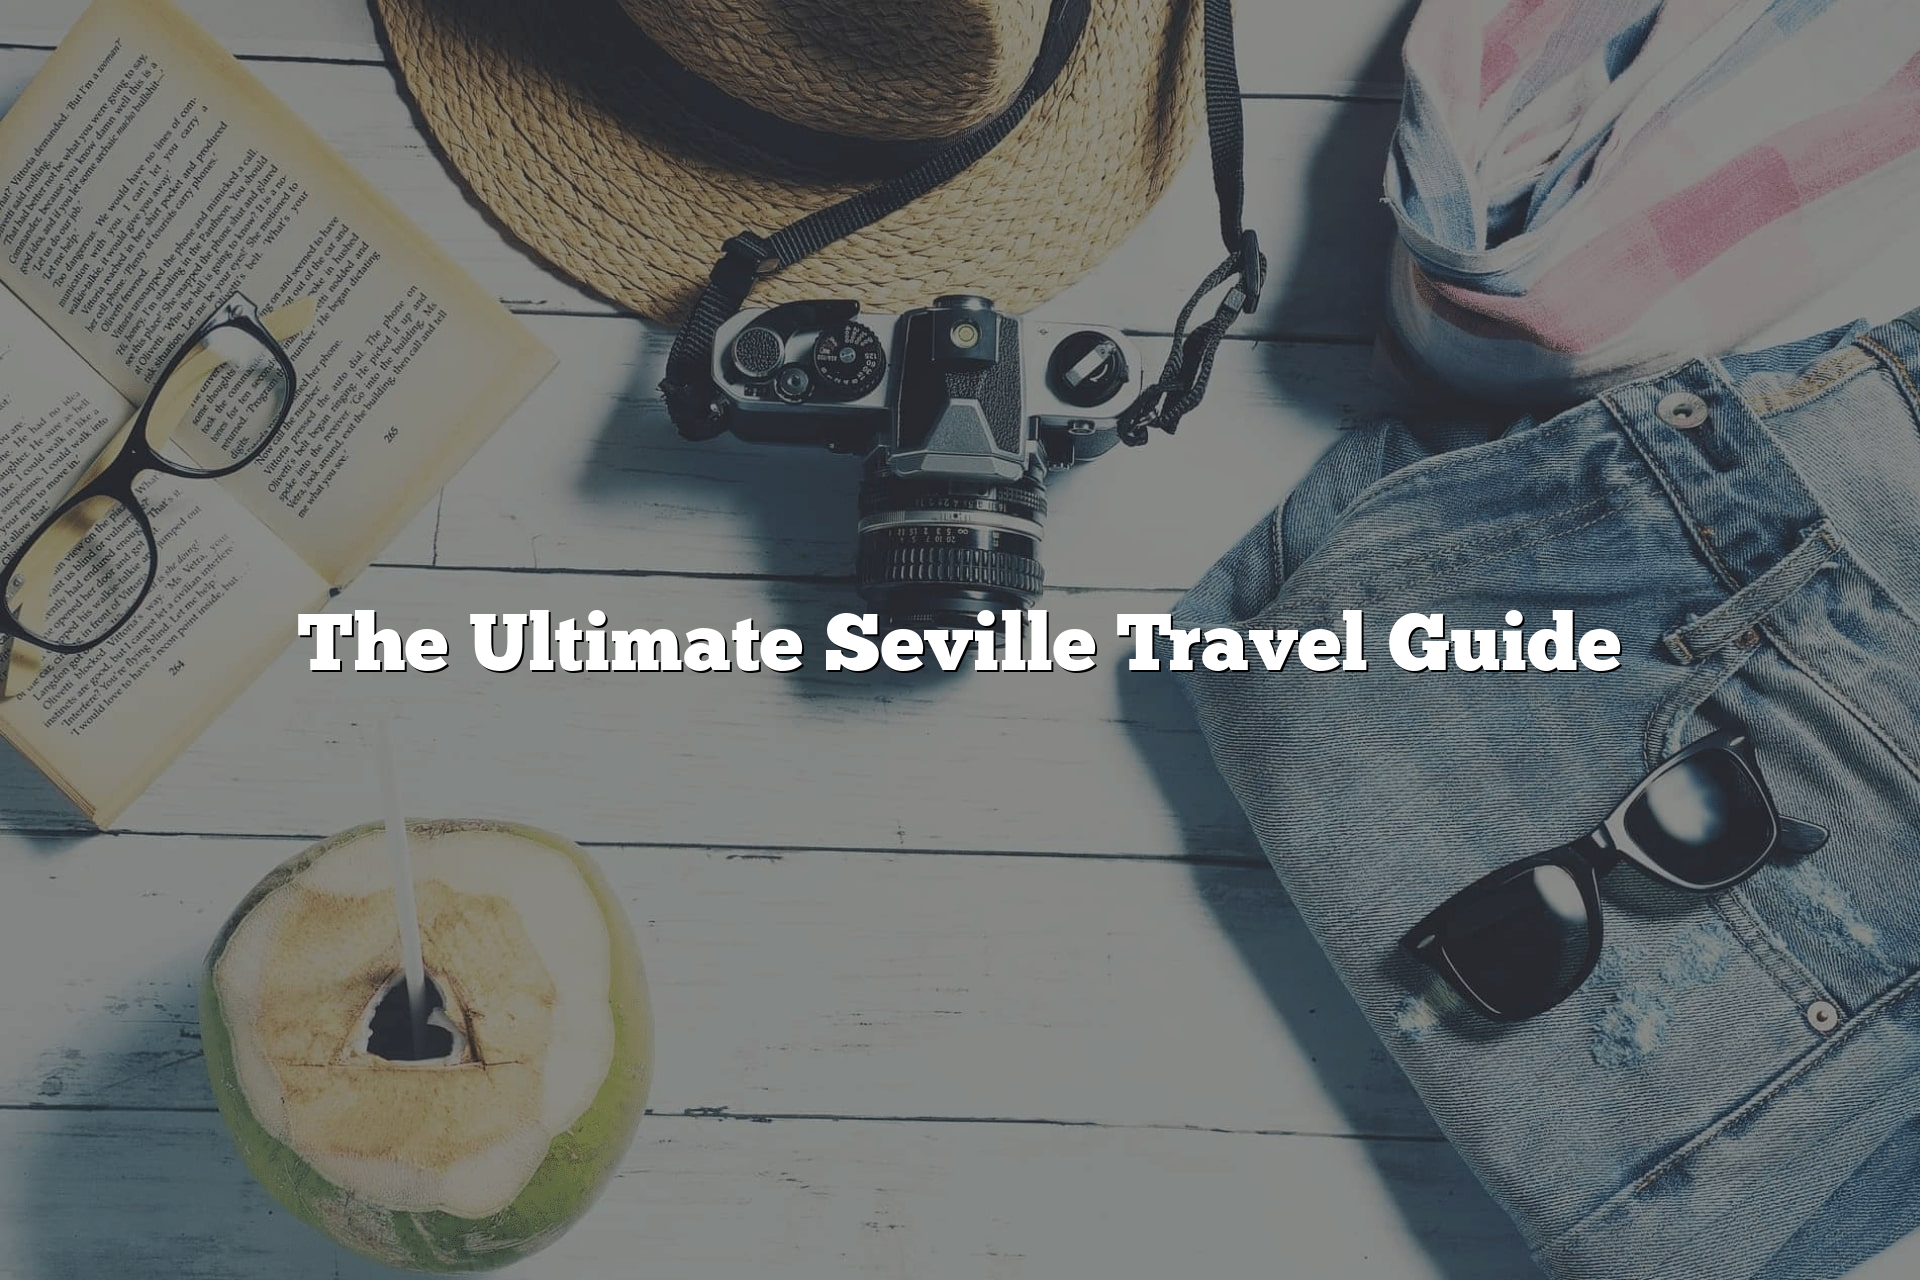 The Ultimate Seville Travel Guide